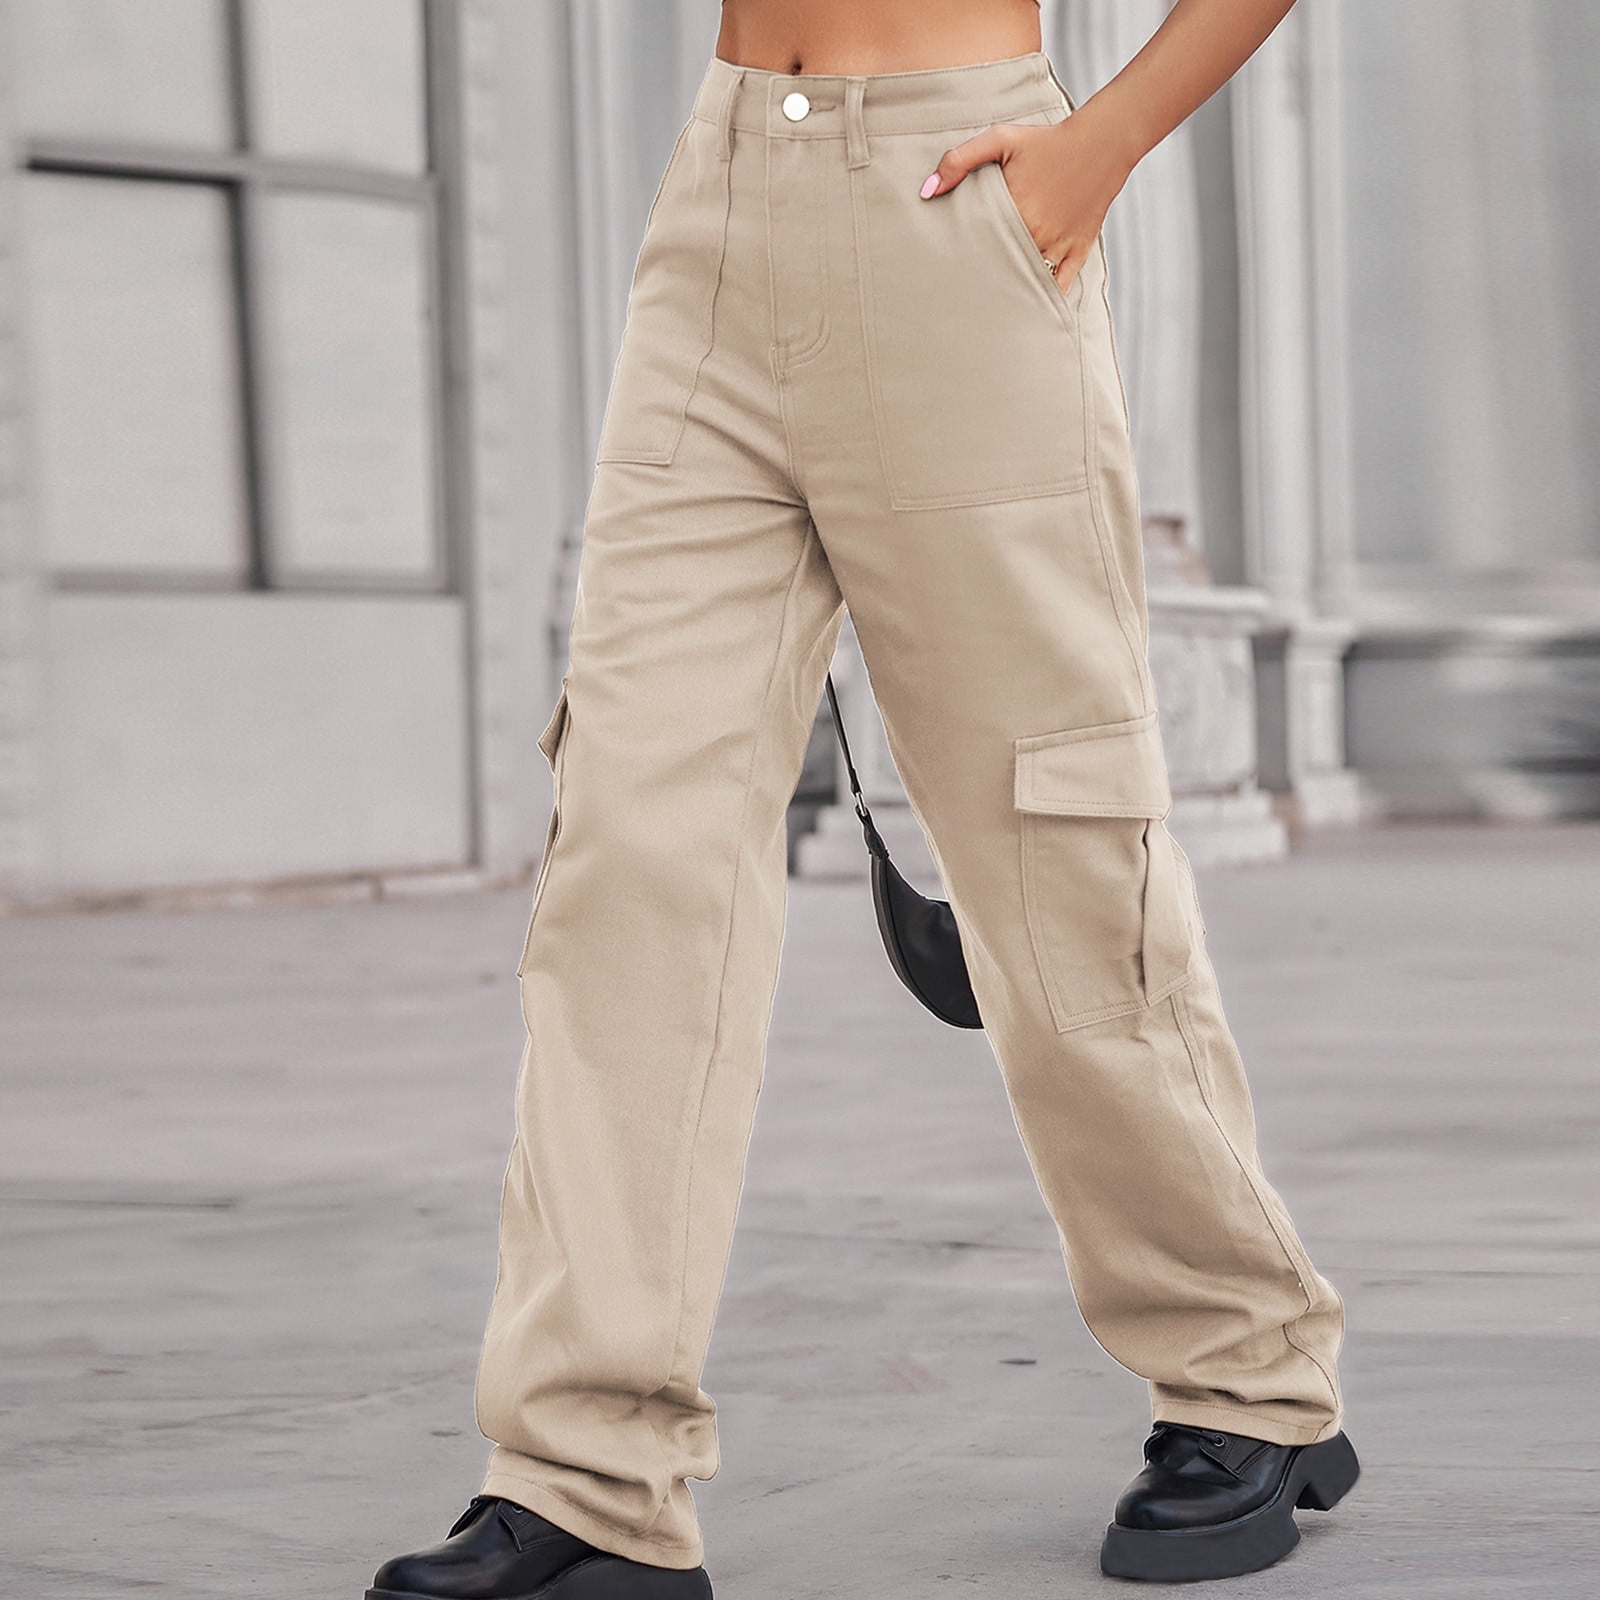 Tdoqot Women's Cargo Pants- Fashion Casual with Pockets High weight  Straight Leg Pants Khaki Size XXL